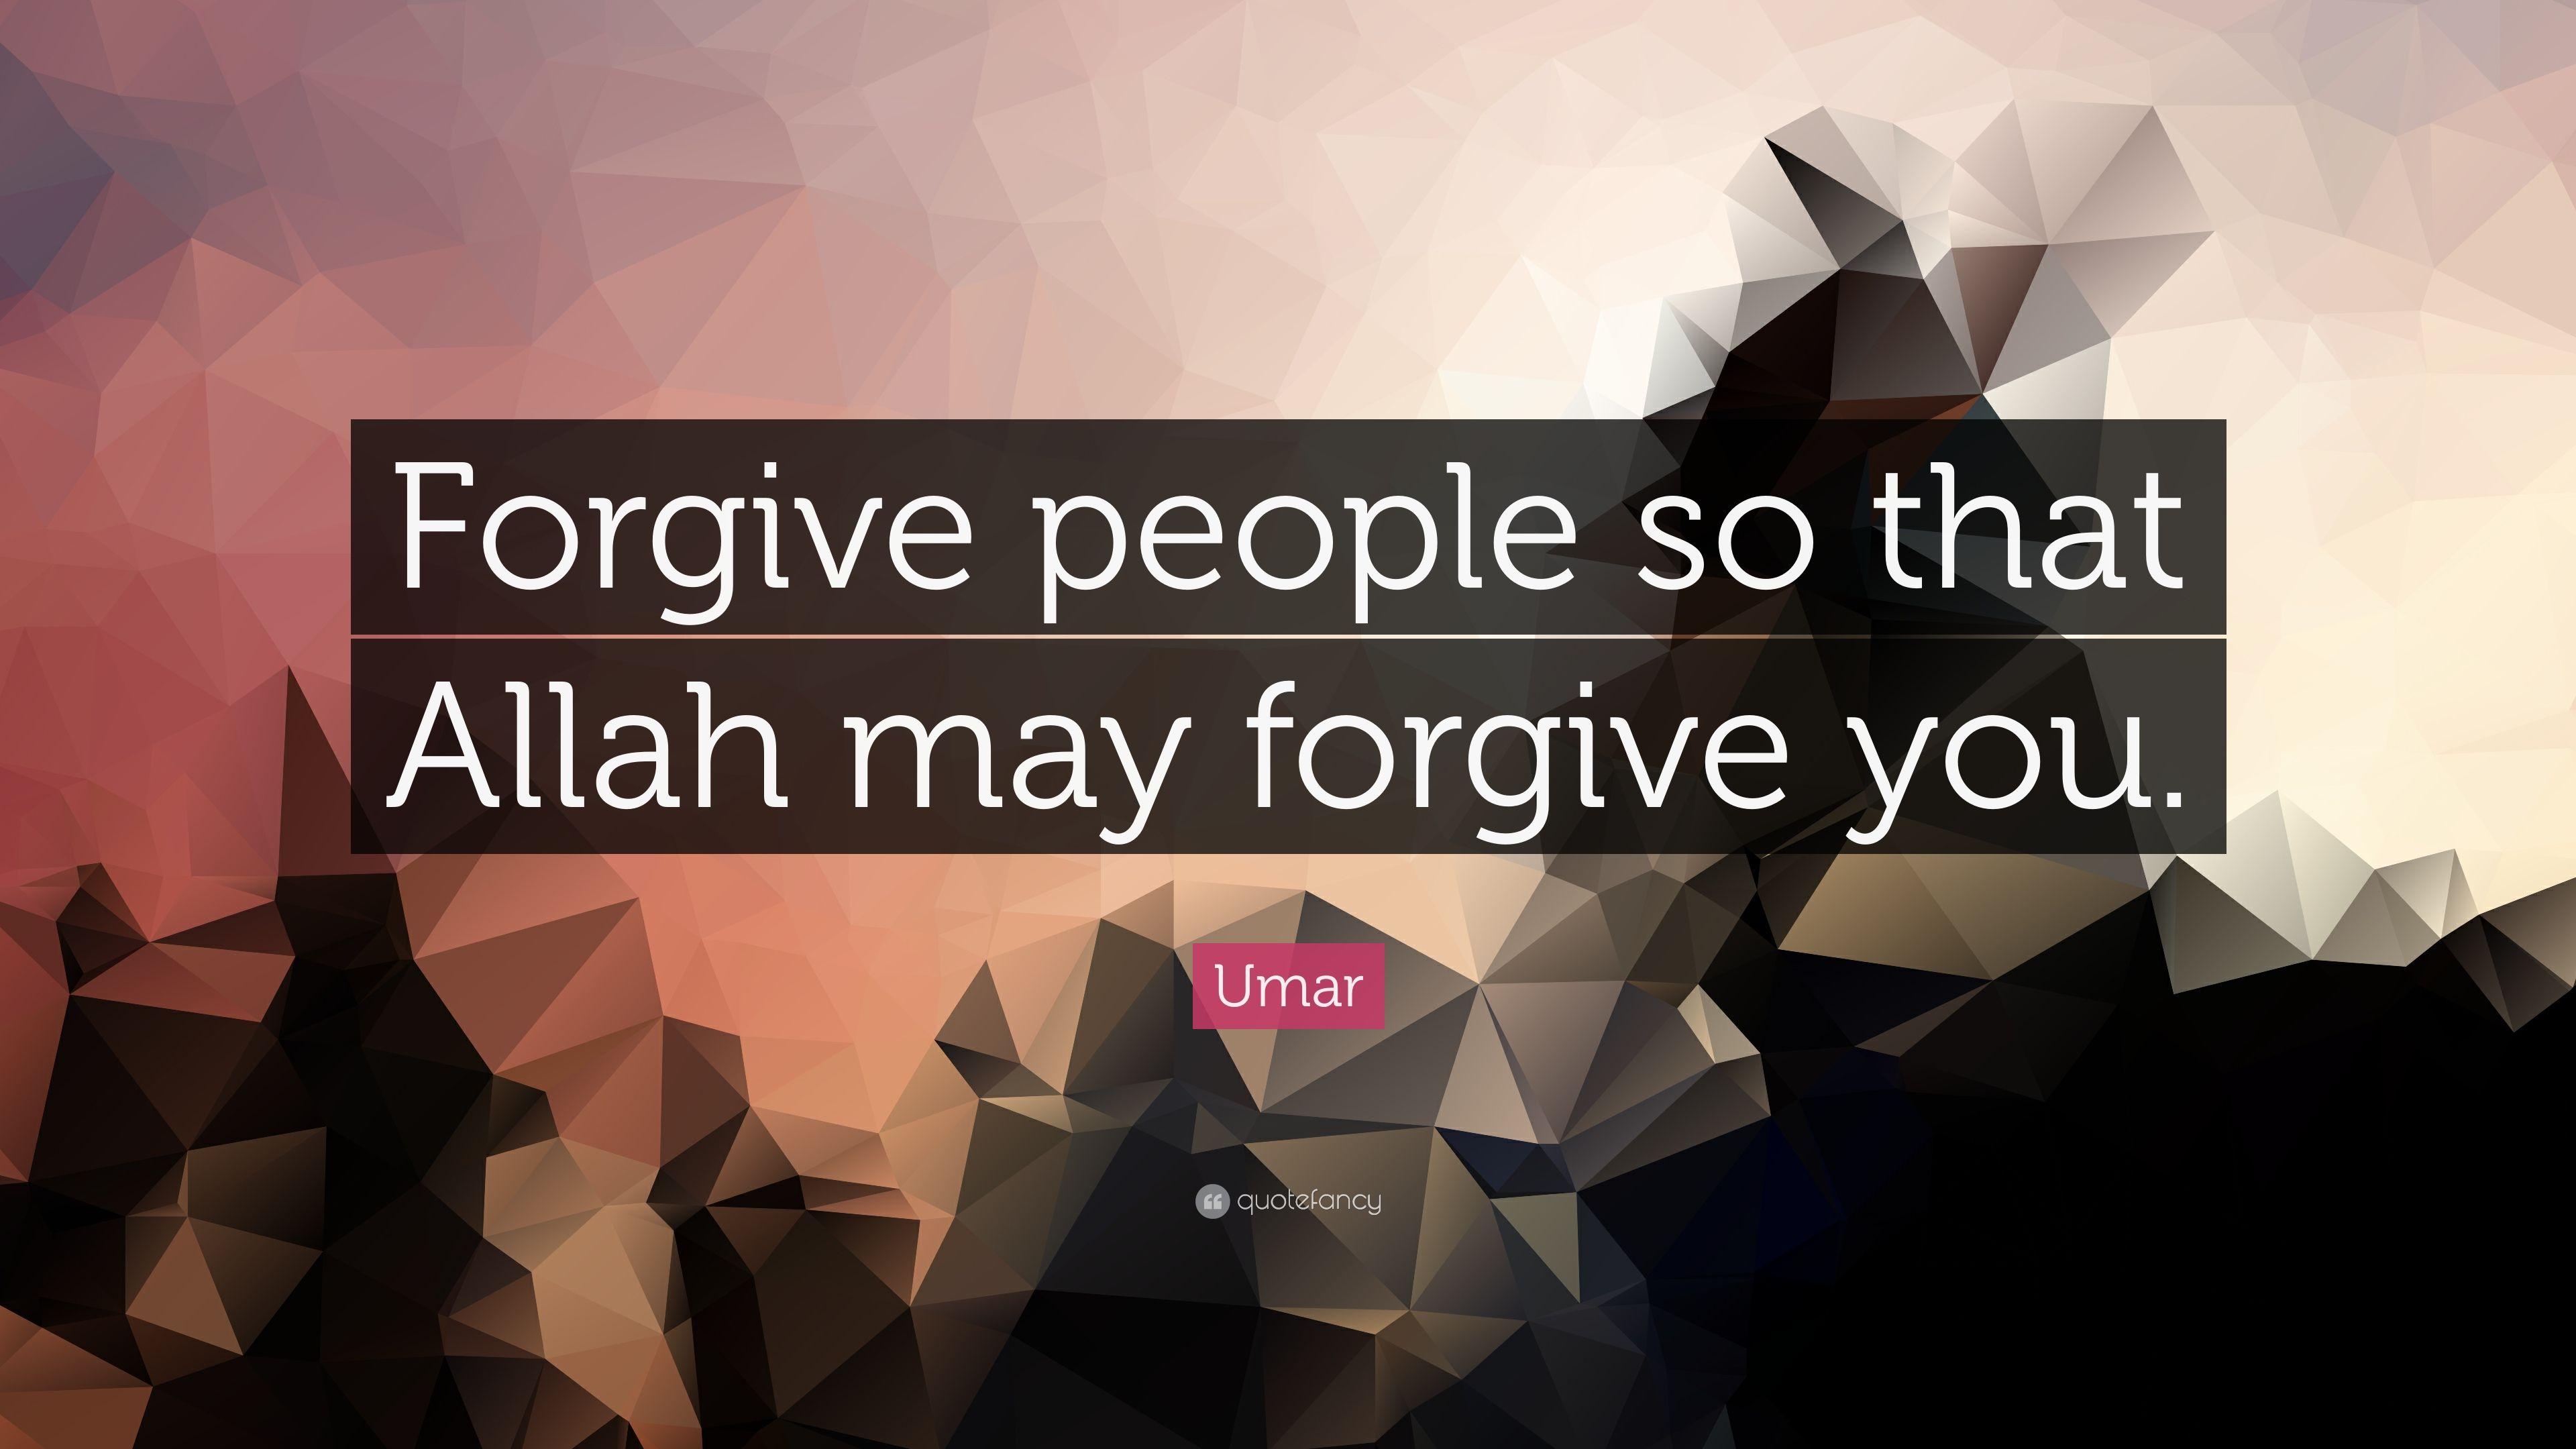 Umar Quote: “Forgive people so that Allah may forgive you.” 12